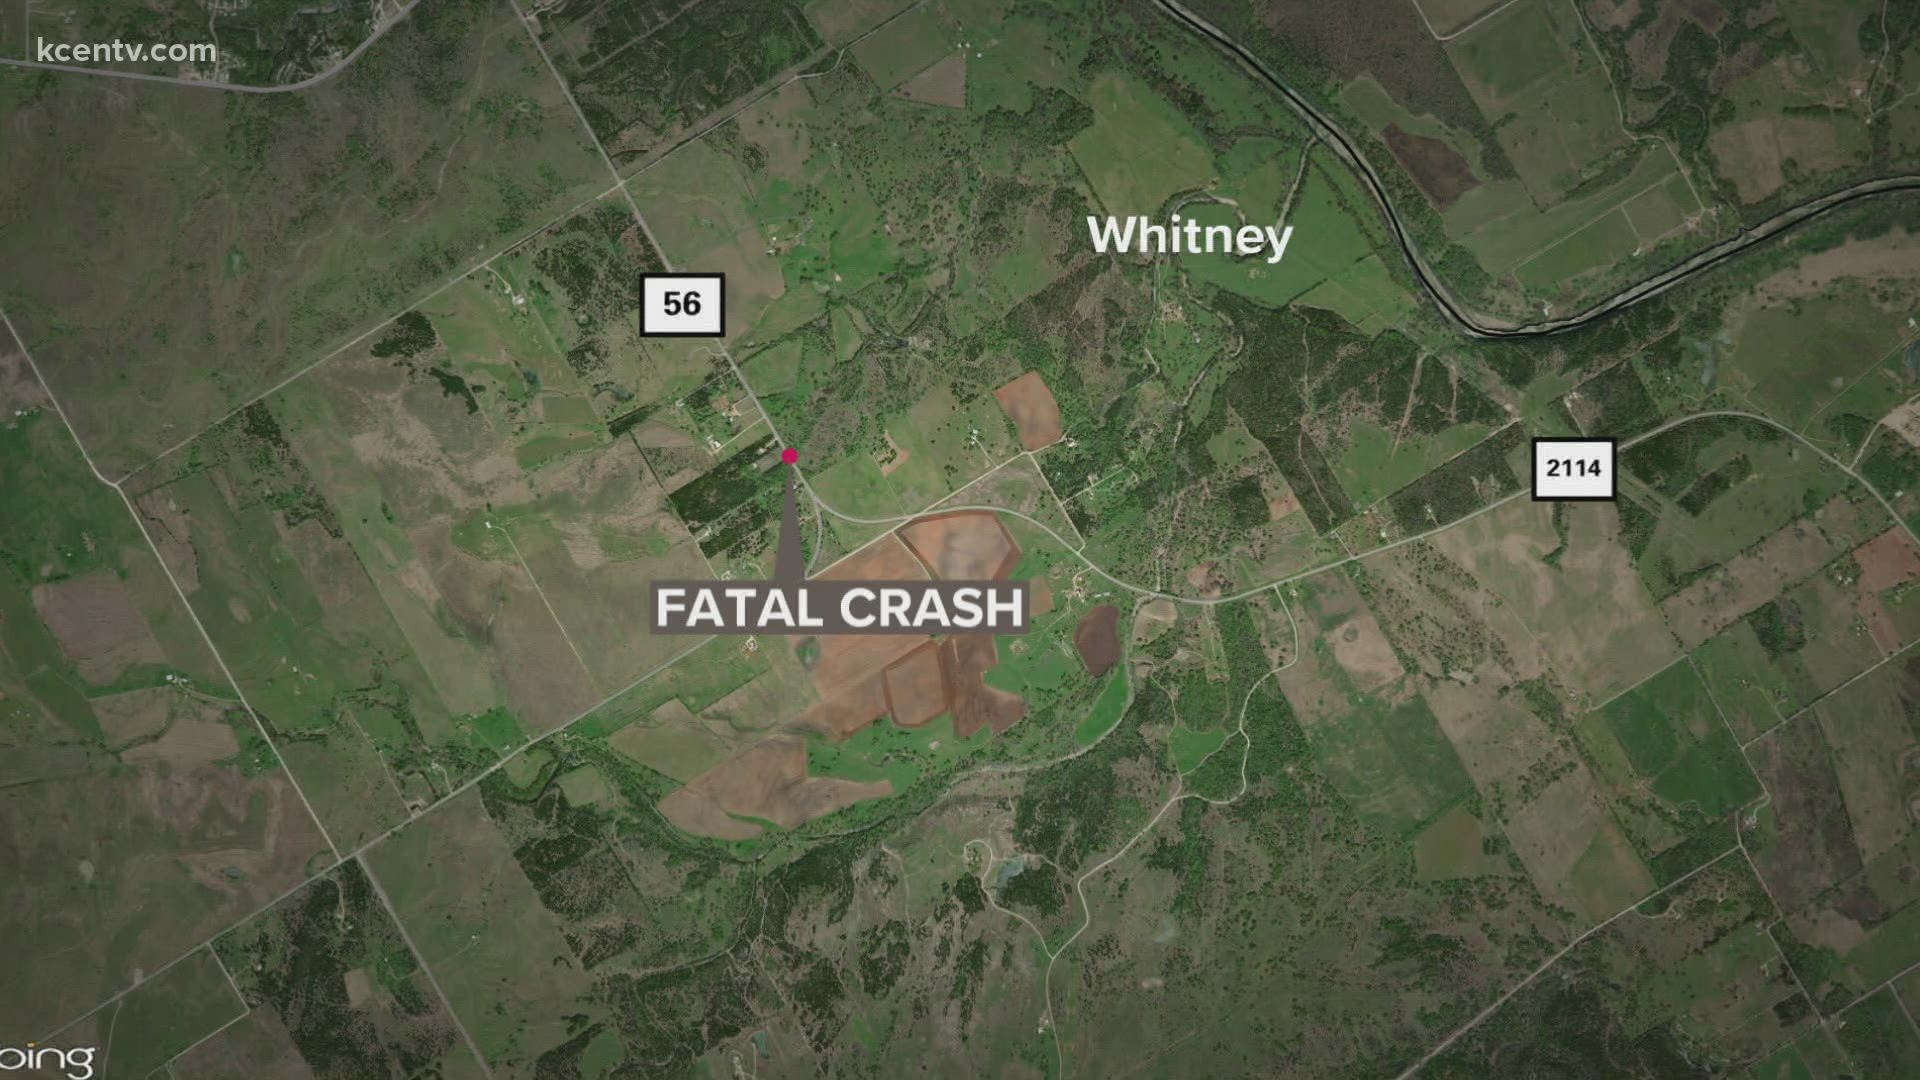 The Texas Department of Public Safety said the crash occurred on FM 56 near FM 2114 in Whitney, Texas around 9:20 p.m.